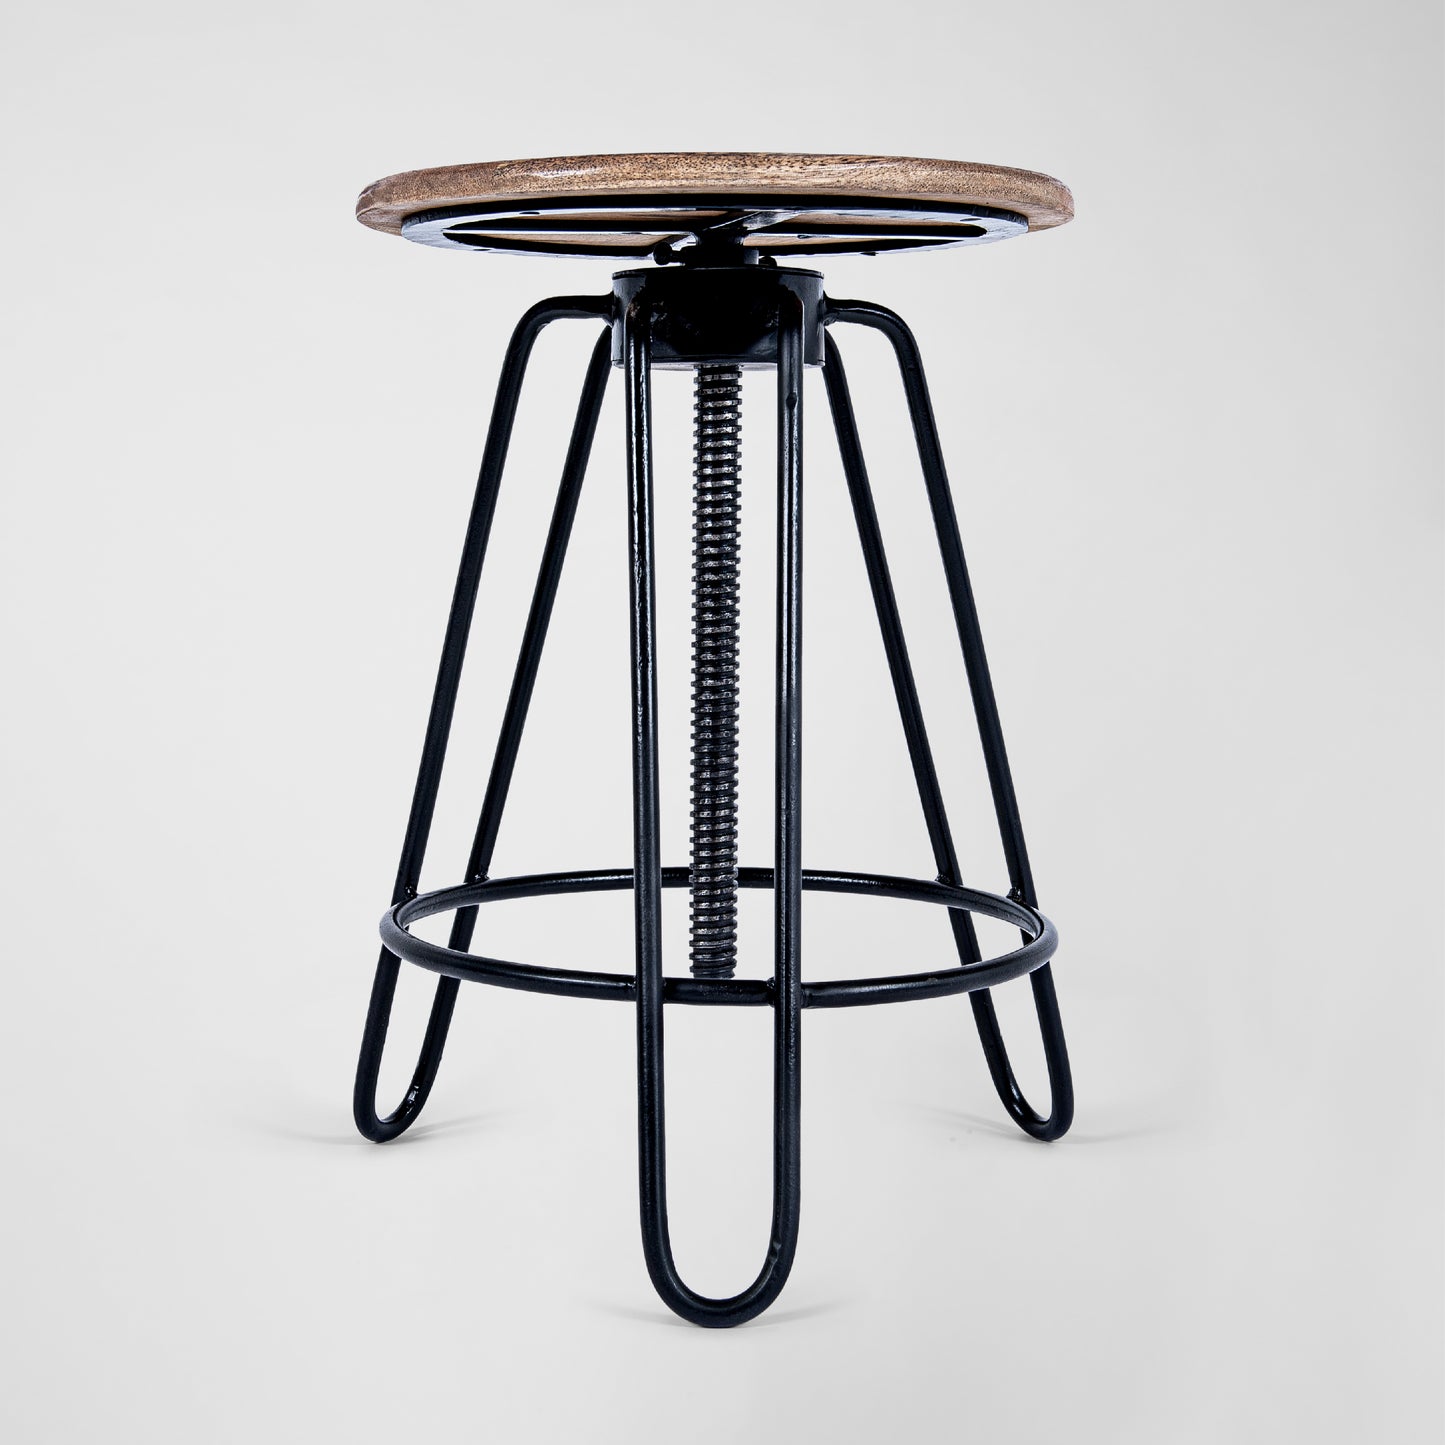 HairPin 102 – Handmade industrial design swivel stool made of metal with wooden seat in black and copper